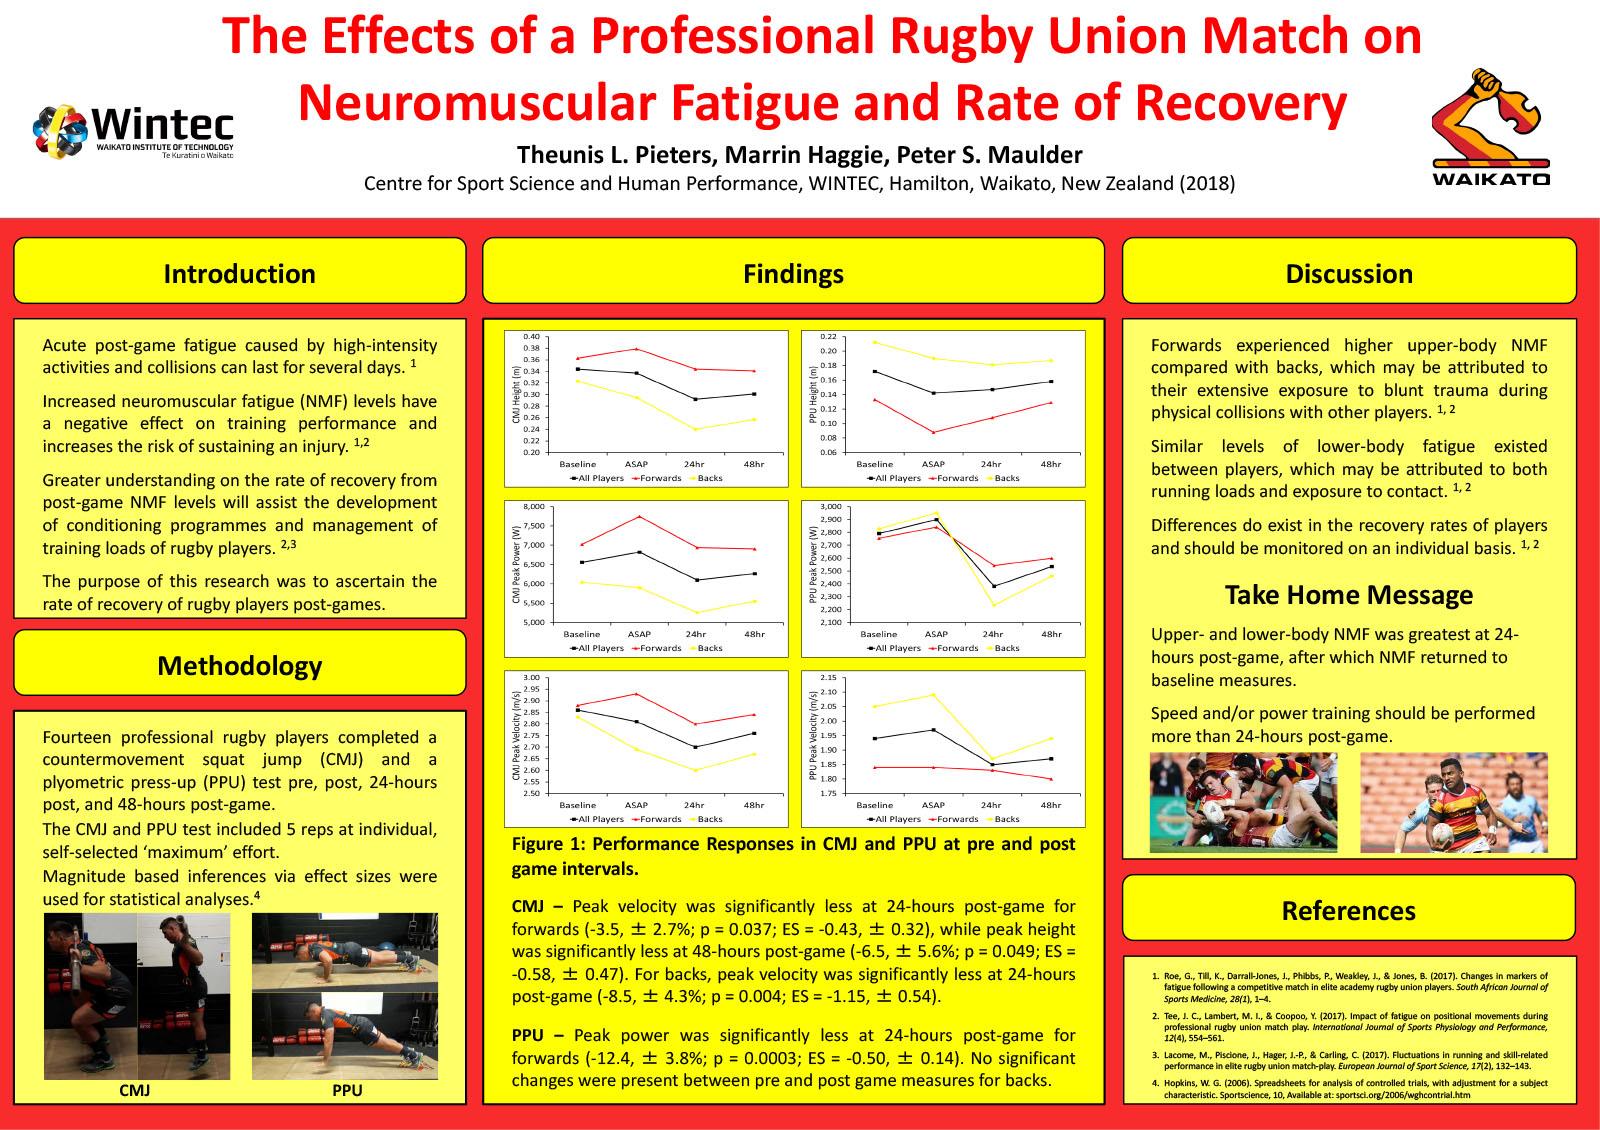 The Effects of a Professional Rugby Union Match on Neuromuscular Fatigue and Rate of Recovery